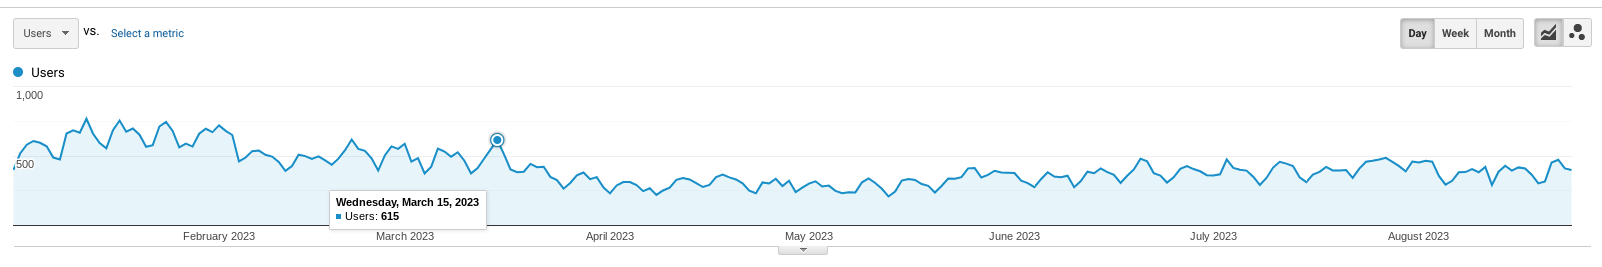 site impacted by March 2023 core update with gradual decline in traffic